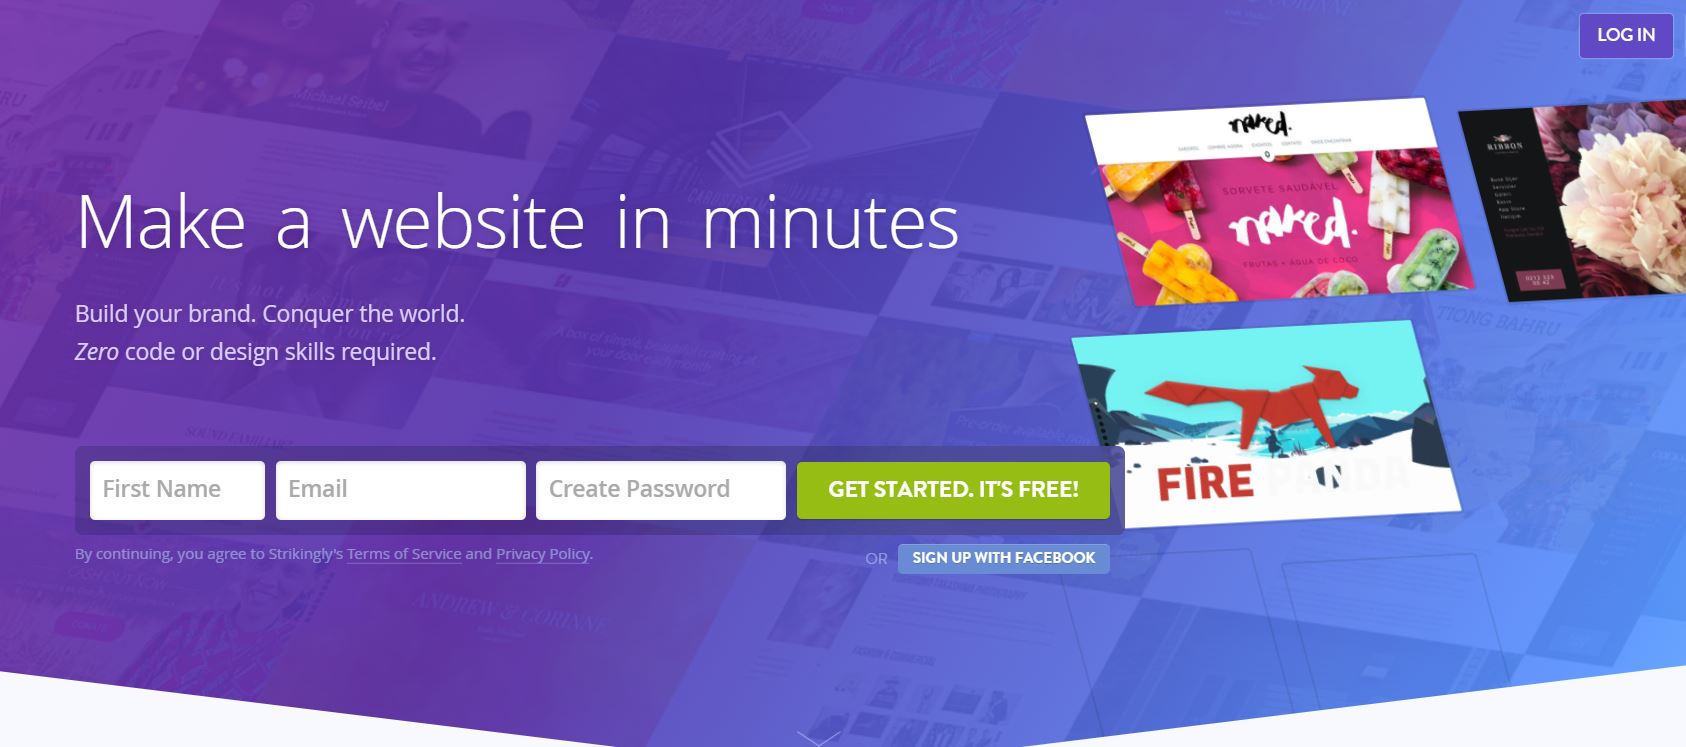 Mystrikingly Is A Free Website-Builder That Creates Gorgeous, Mobile-Friendly Websites